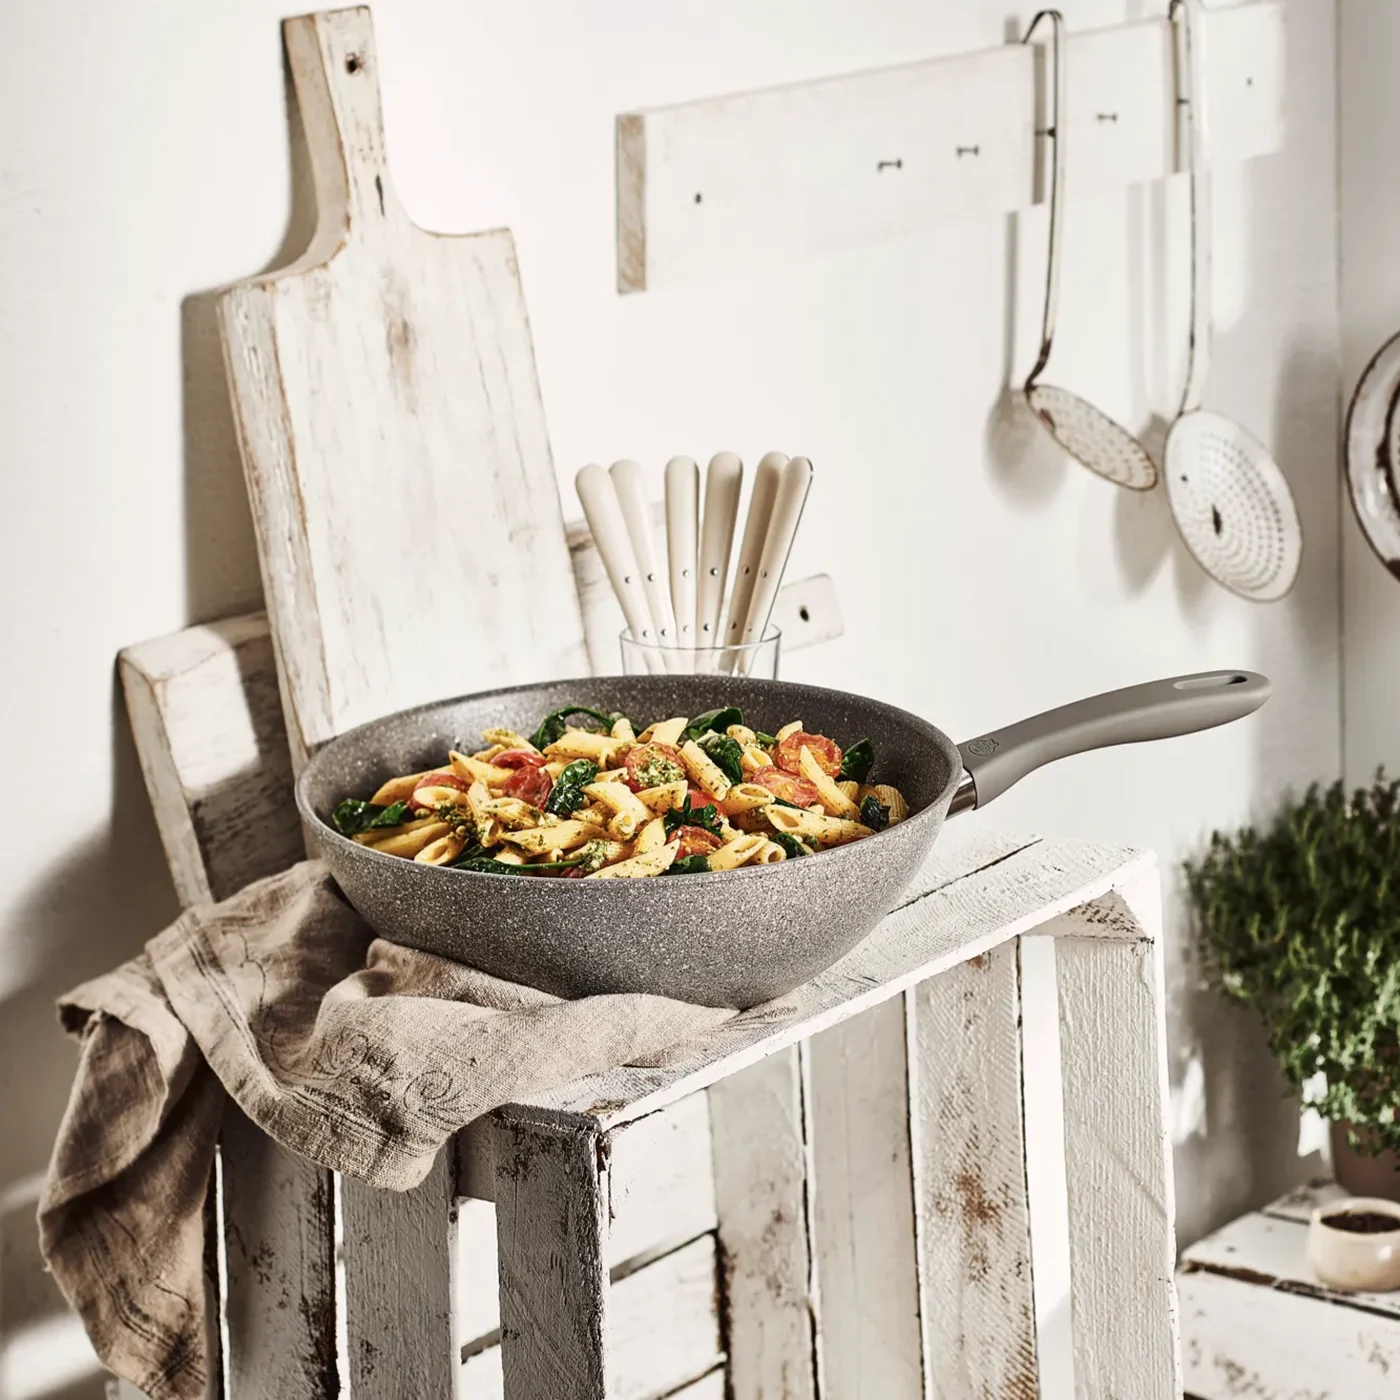 https://www.homethreads.com/files/zwilling/75003-100-0-ballarini-parma-plus-by-henckels-11-inch-aluminum-nonstick-stir-fry-pan-with-lid-made-in-italy-4.webp